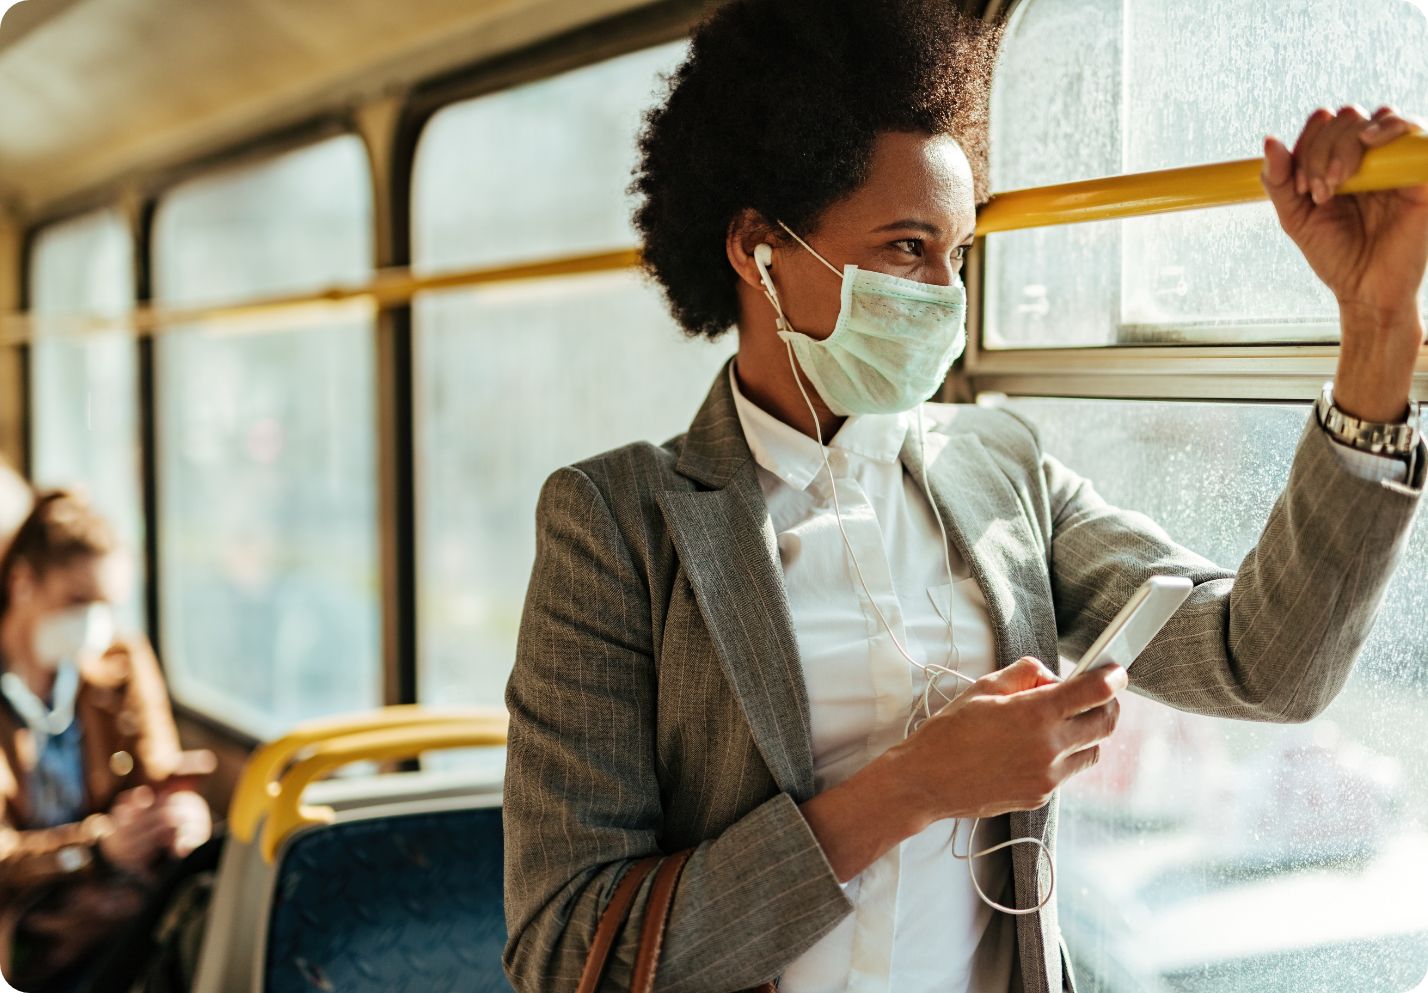 African American woman standing on a bus wearing a face mask for protection against COVID-19